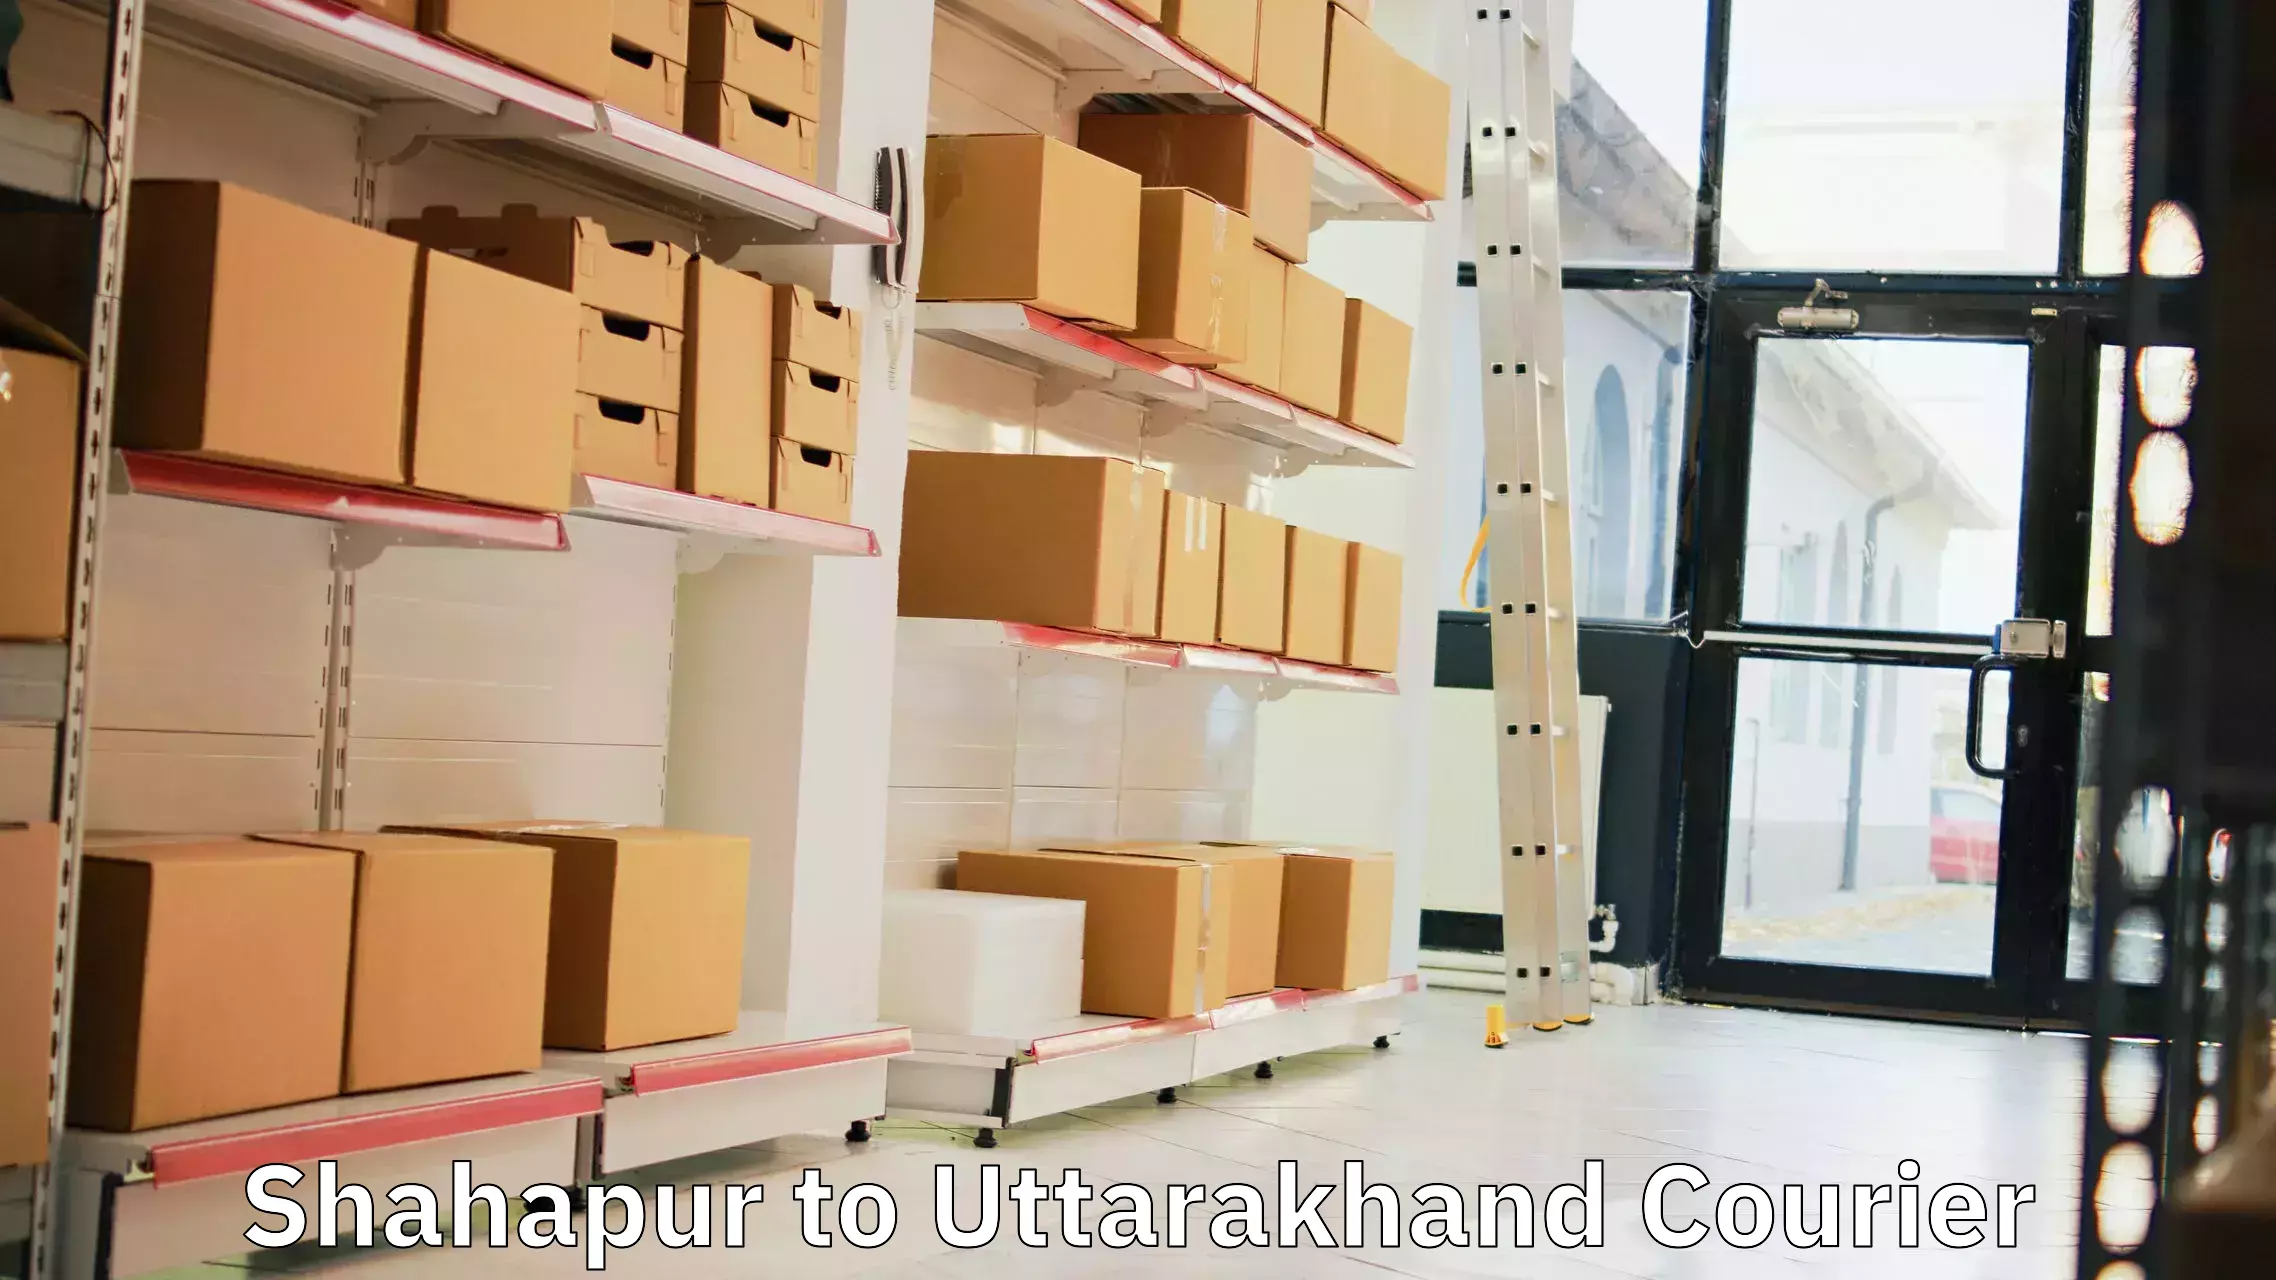 Courier insurance in Shahapur to Roorkee